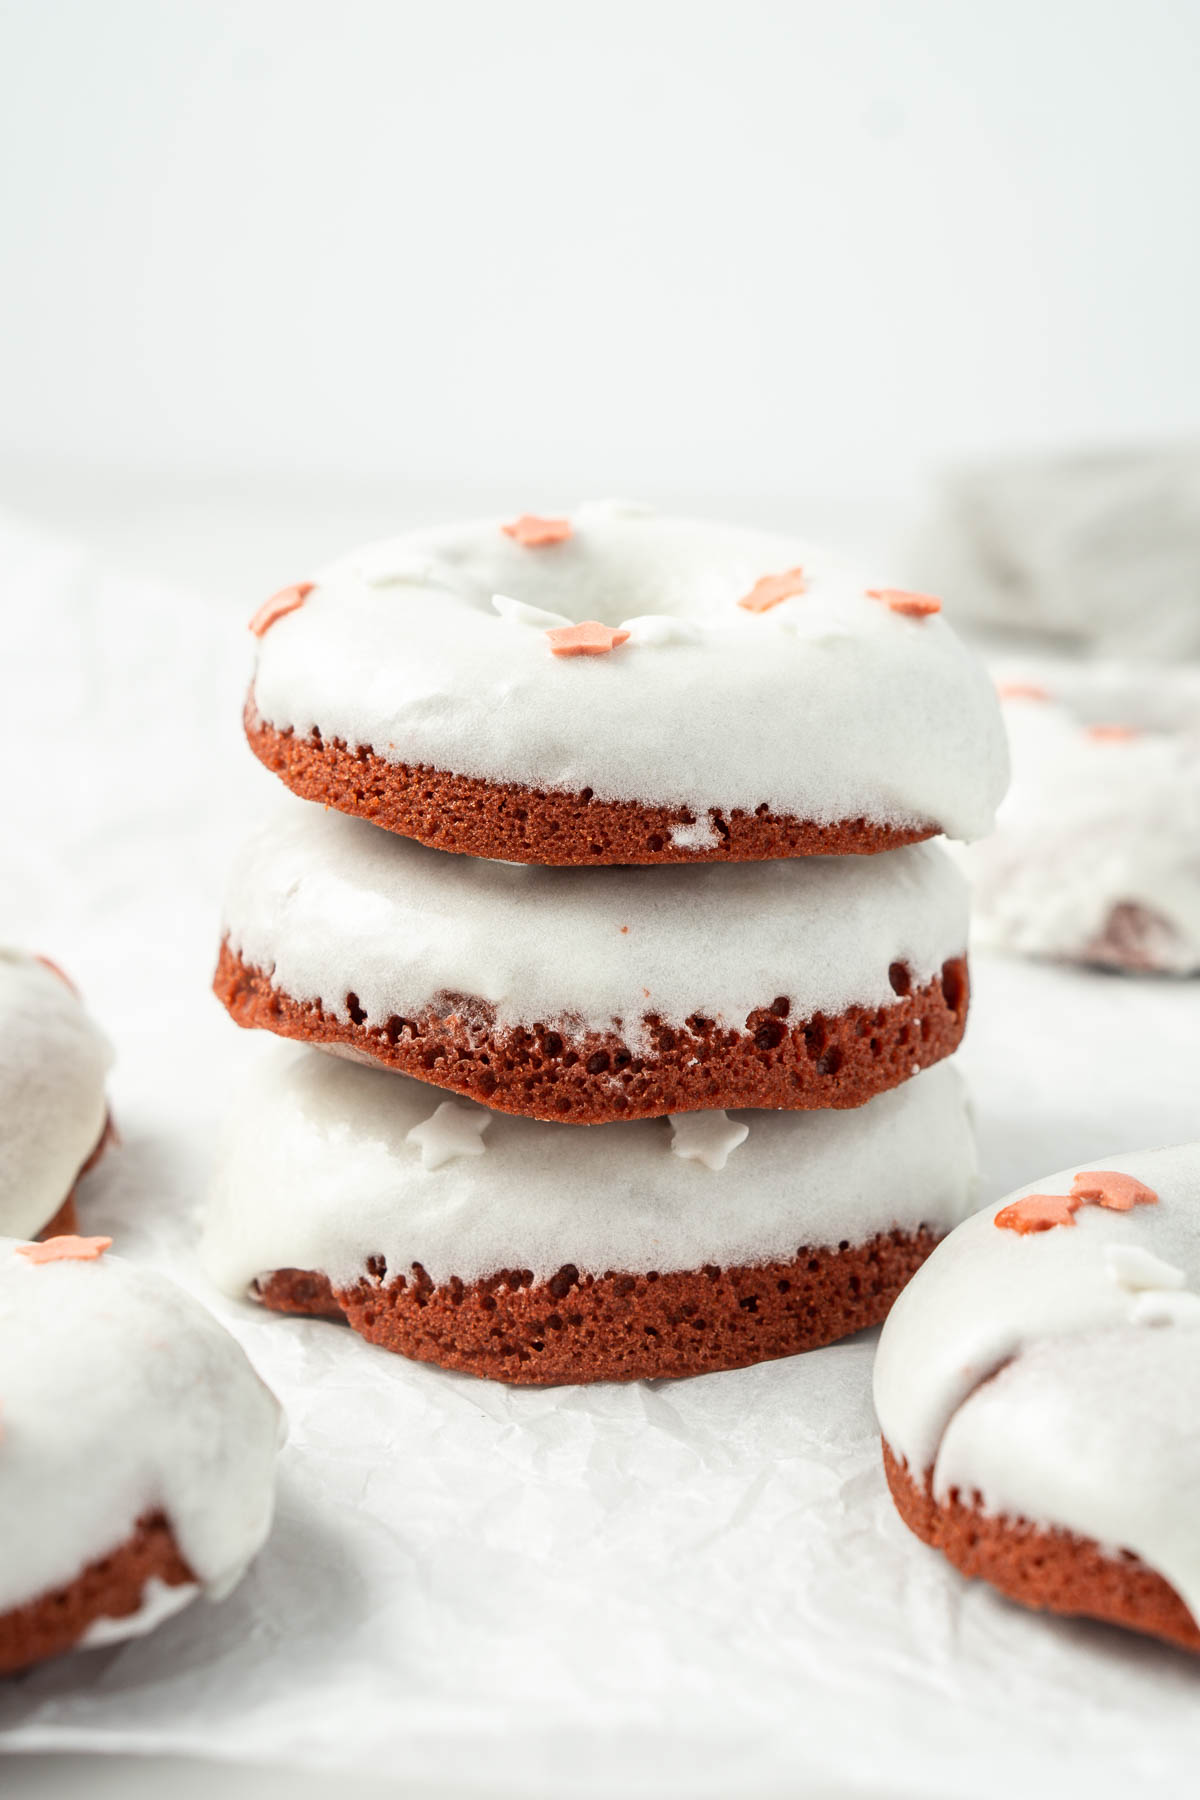 Three red velvet doughnuts staked on top of each other with white cream cheese glaze and red and white sprinkles.